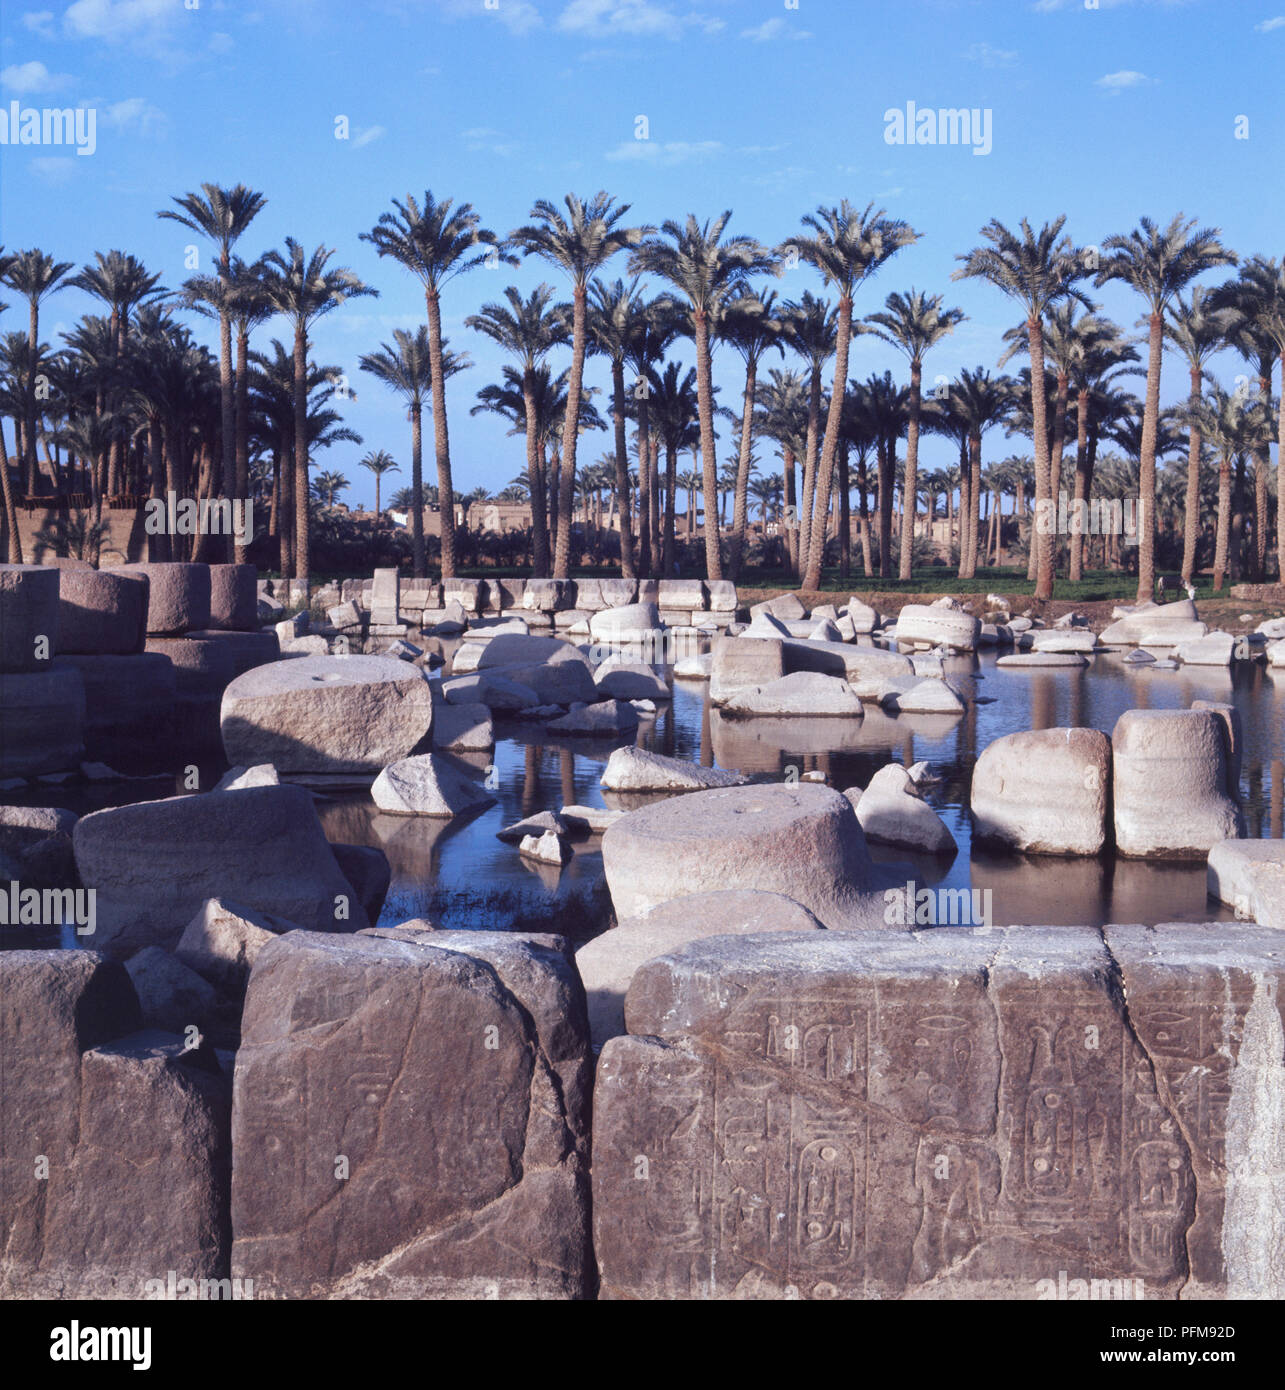 Egypt, Memphis, ancient city of Egypt, capital of the Old Kingdom flooded ruins, stone with hieroglyphics in foreground, palm trees in background. Stock Photo